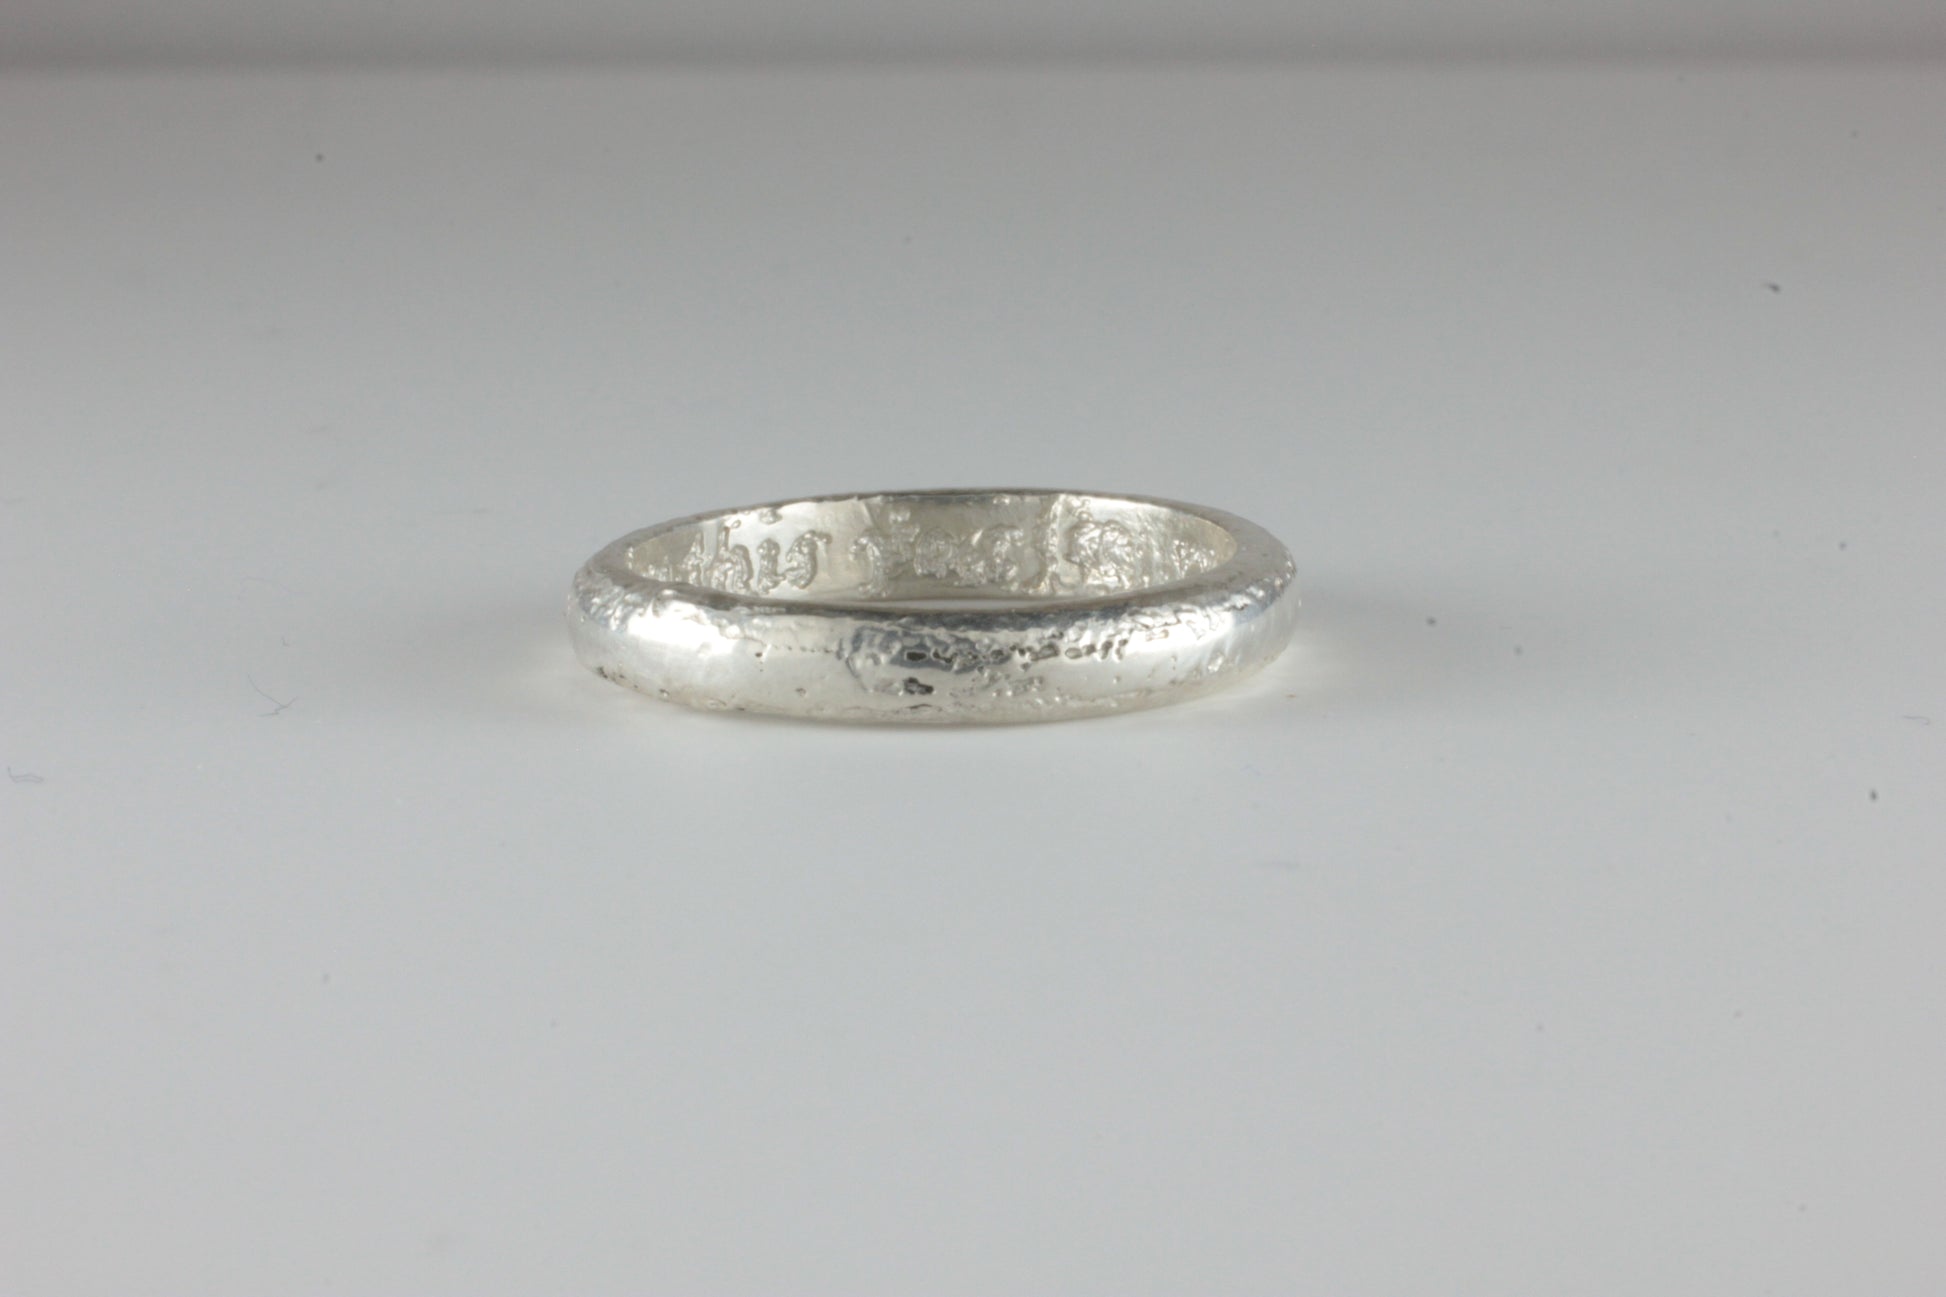 'When this you see, remember mee' Medieval Posy Ring